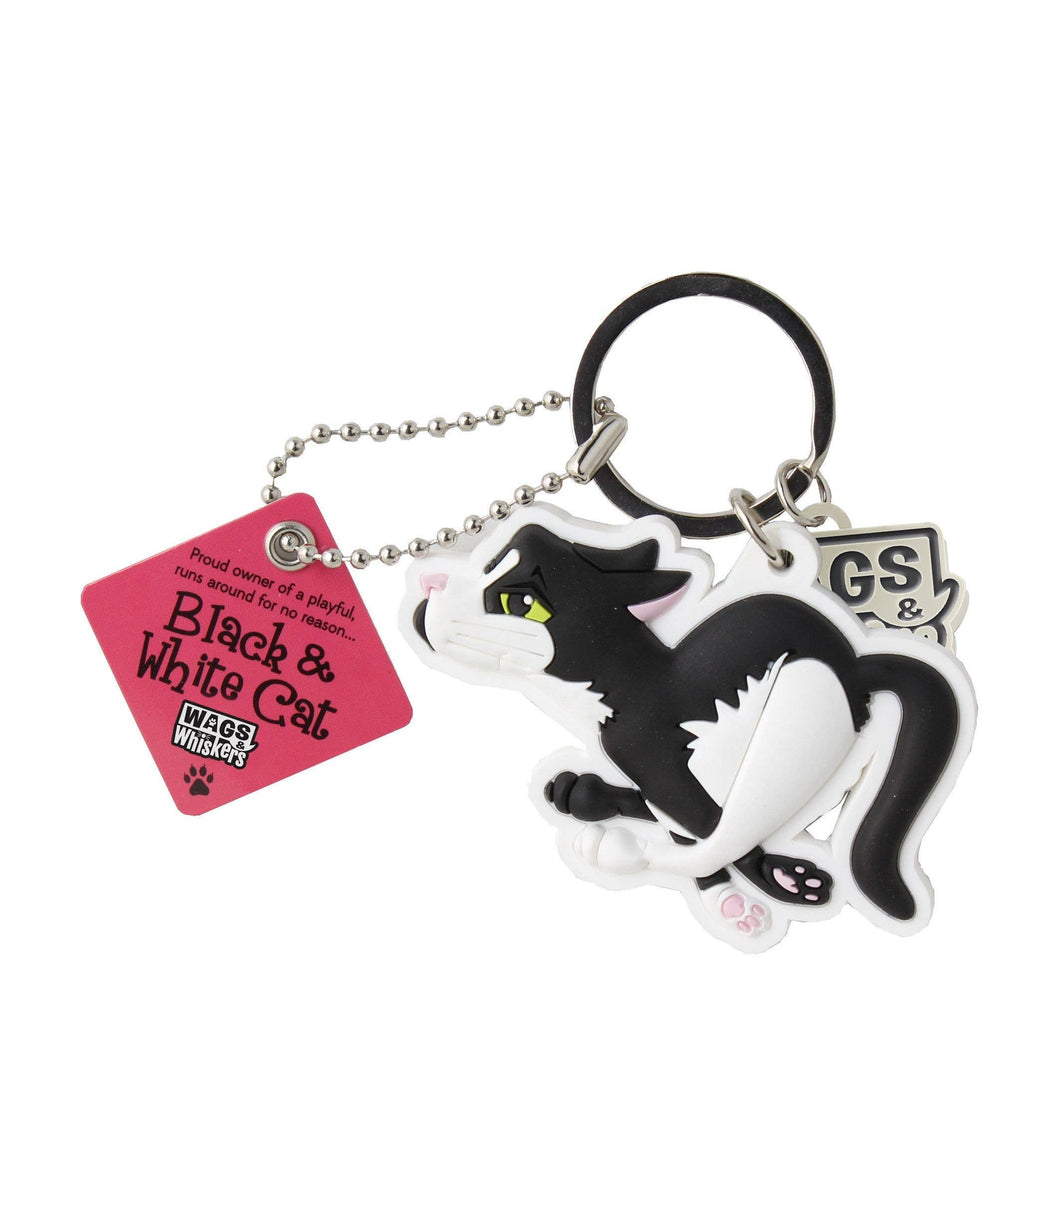 History & Heraldry - WagsWhiskers Keyring - Black/White Cat Playful and Running